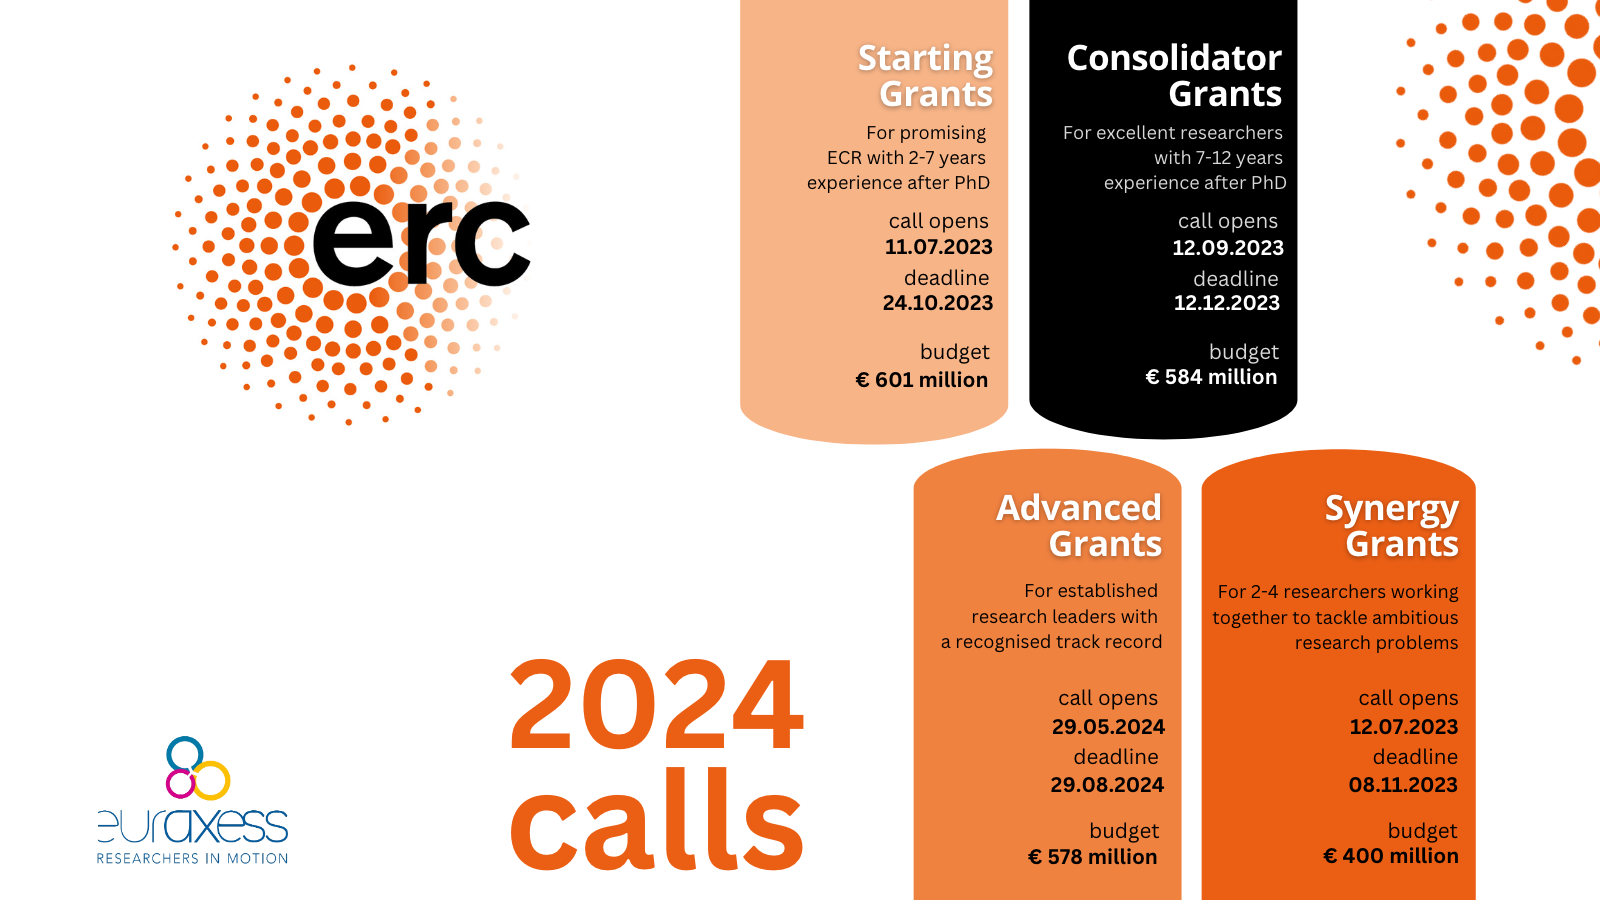 The ERC's plan for 2024 adopted